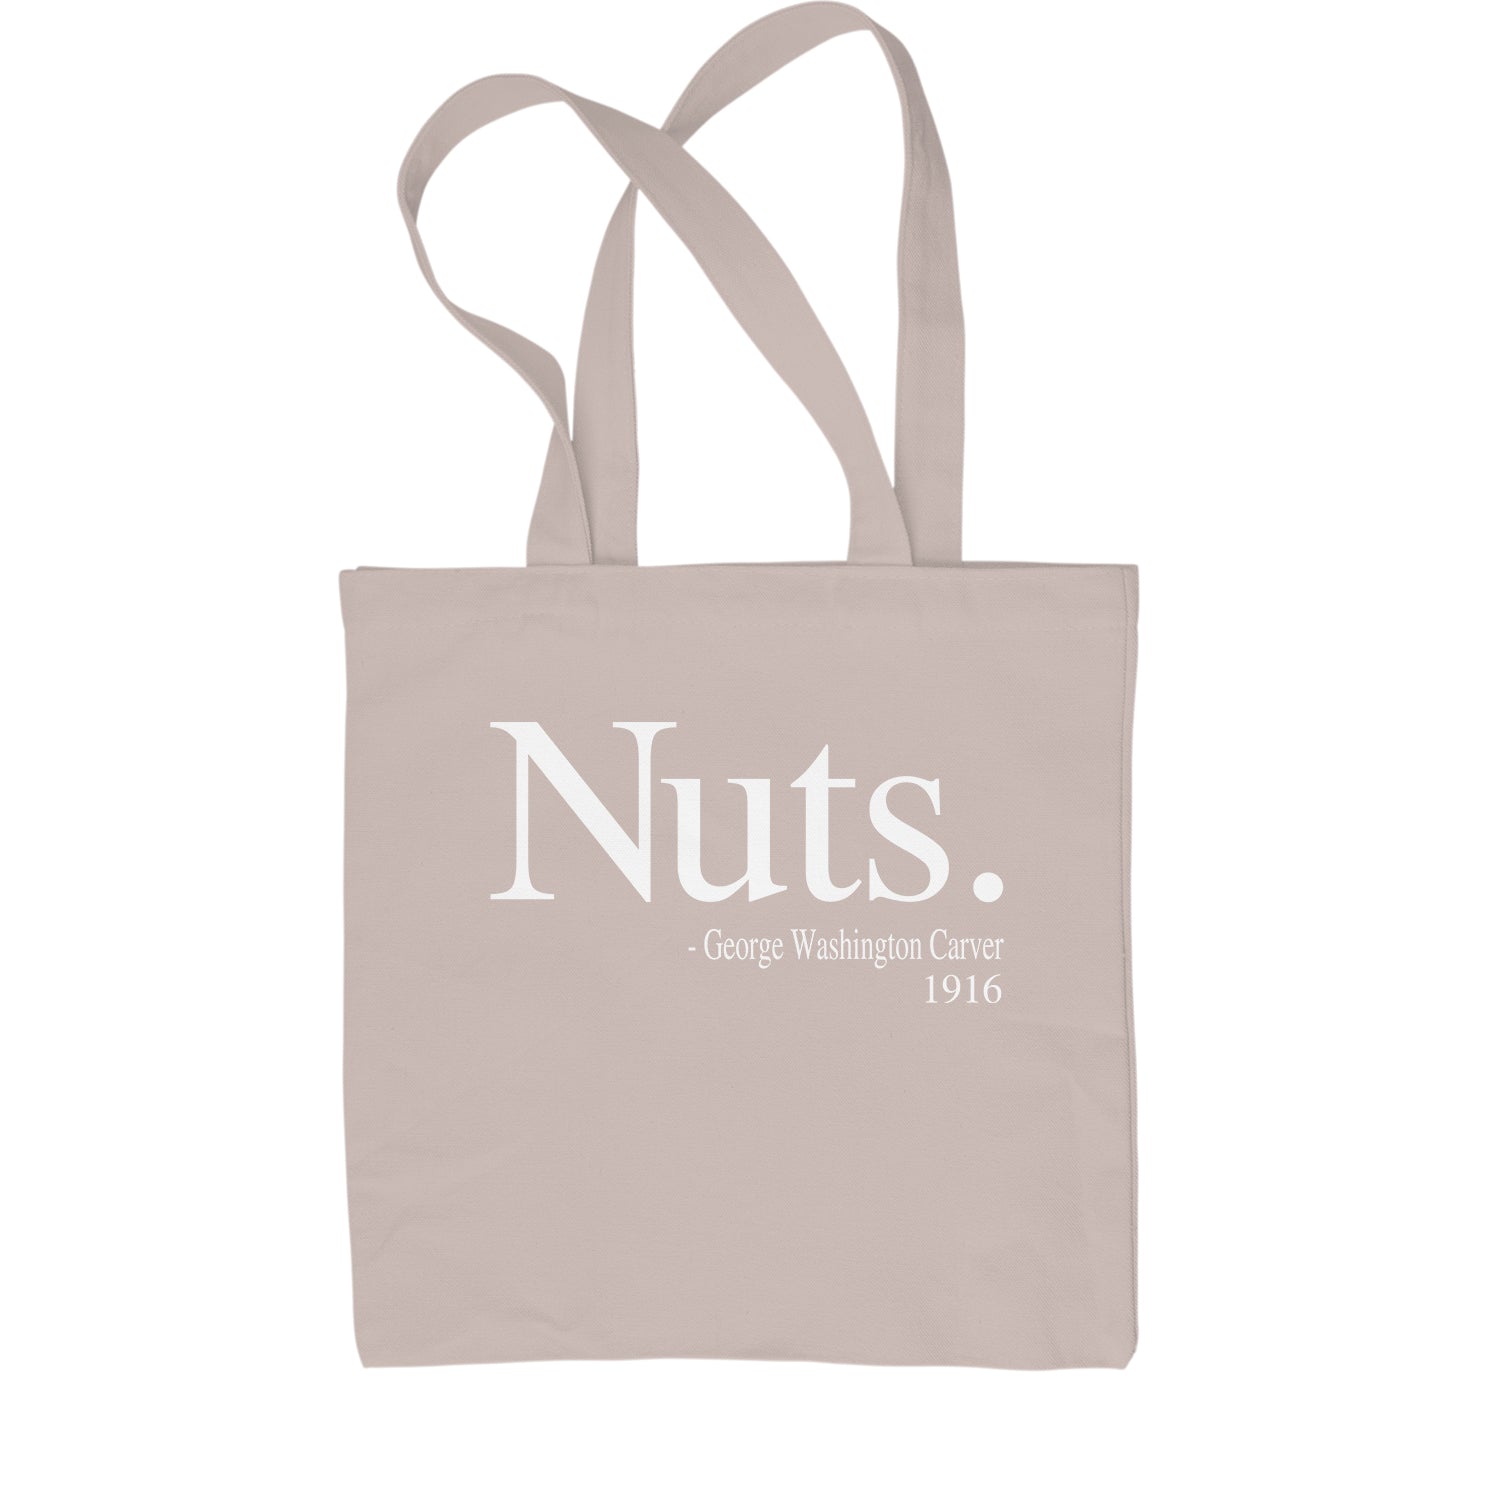 Nuts Quote George Washington Carver Shopping Tote Bag african, african american, afro, american, black, carver, george, go, harriet, history, malcolm, me, nah, nuts, out, parks, rosa, try, tubman, washington, we, x by Expression Tees